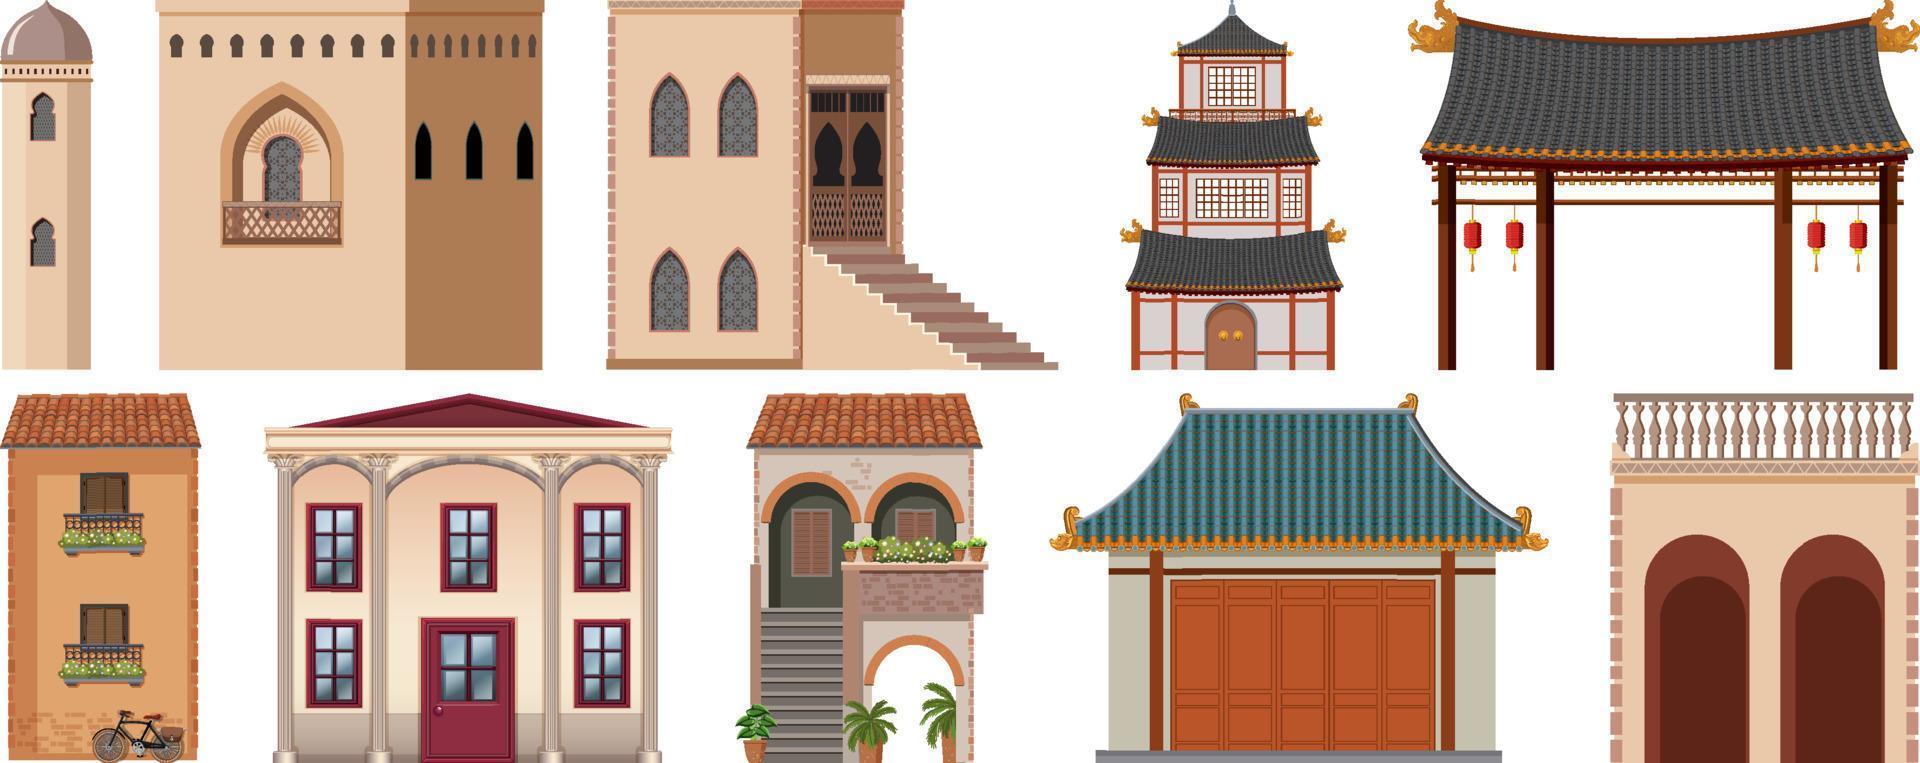 Different designs of buildings around the world vector